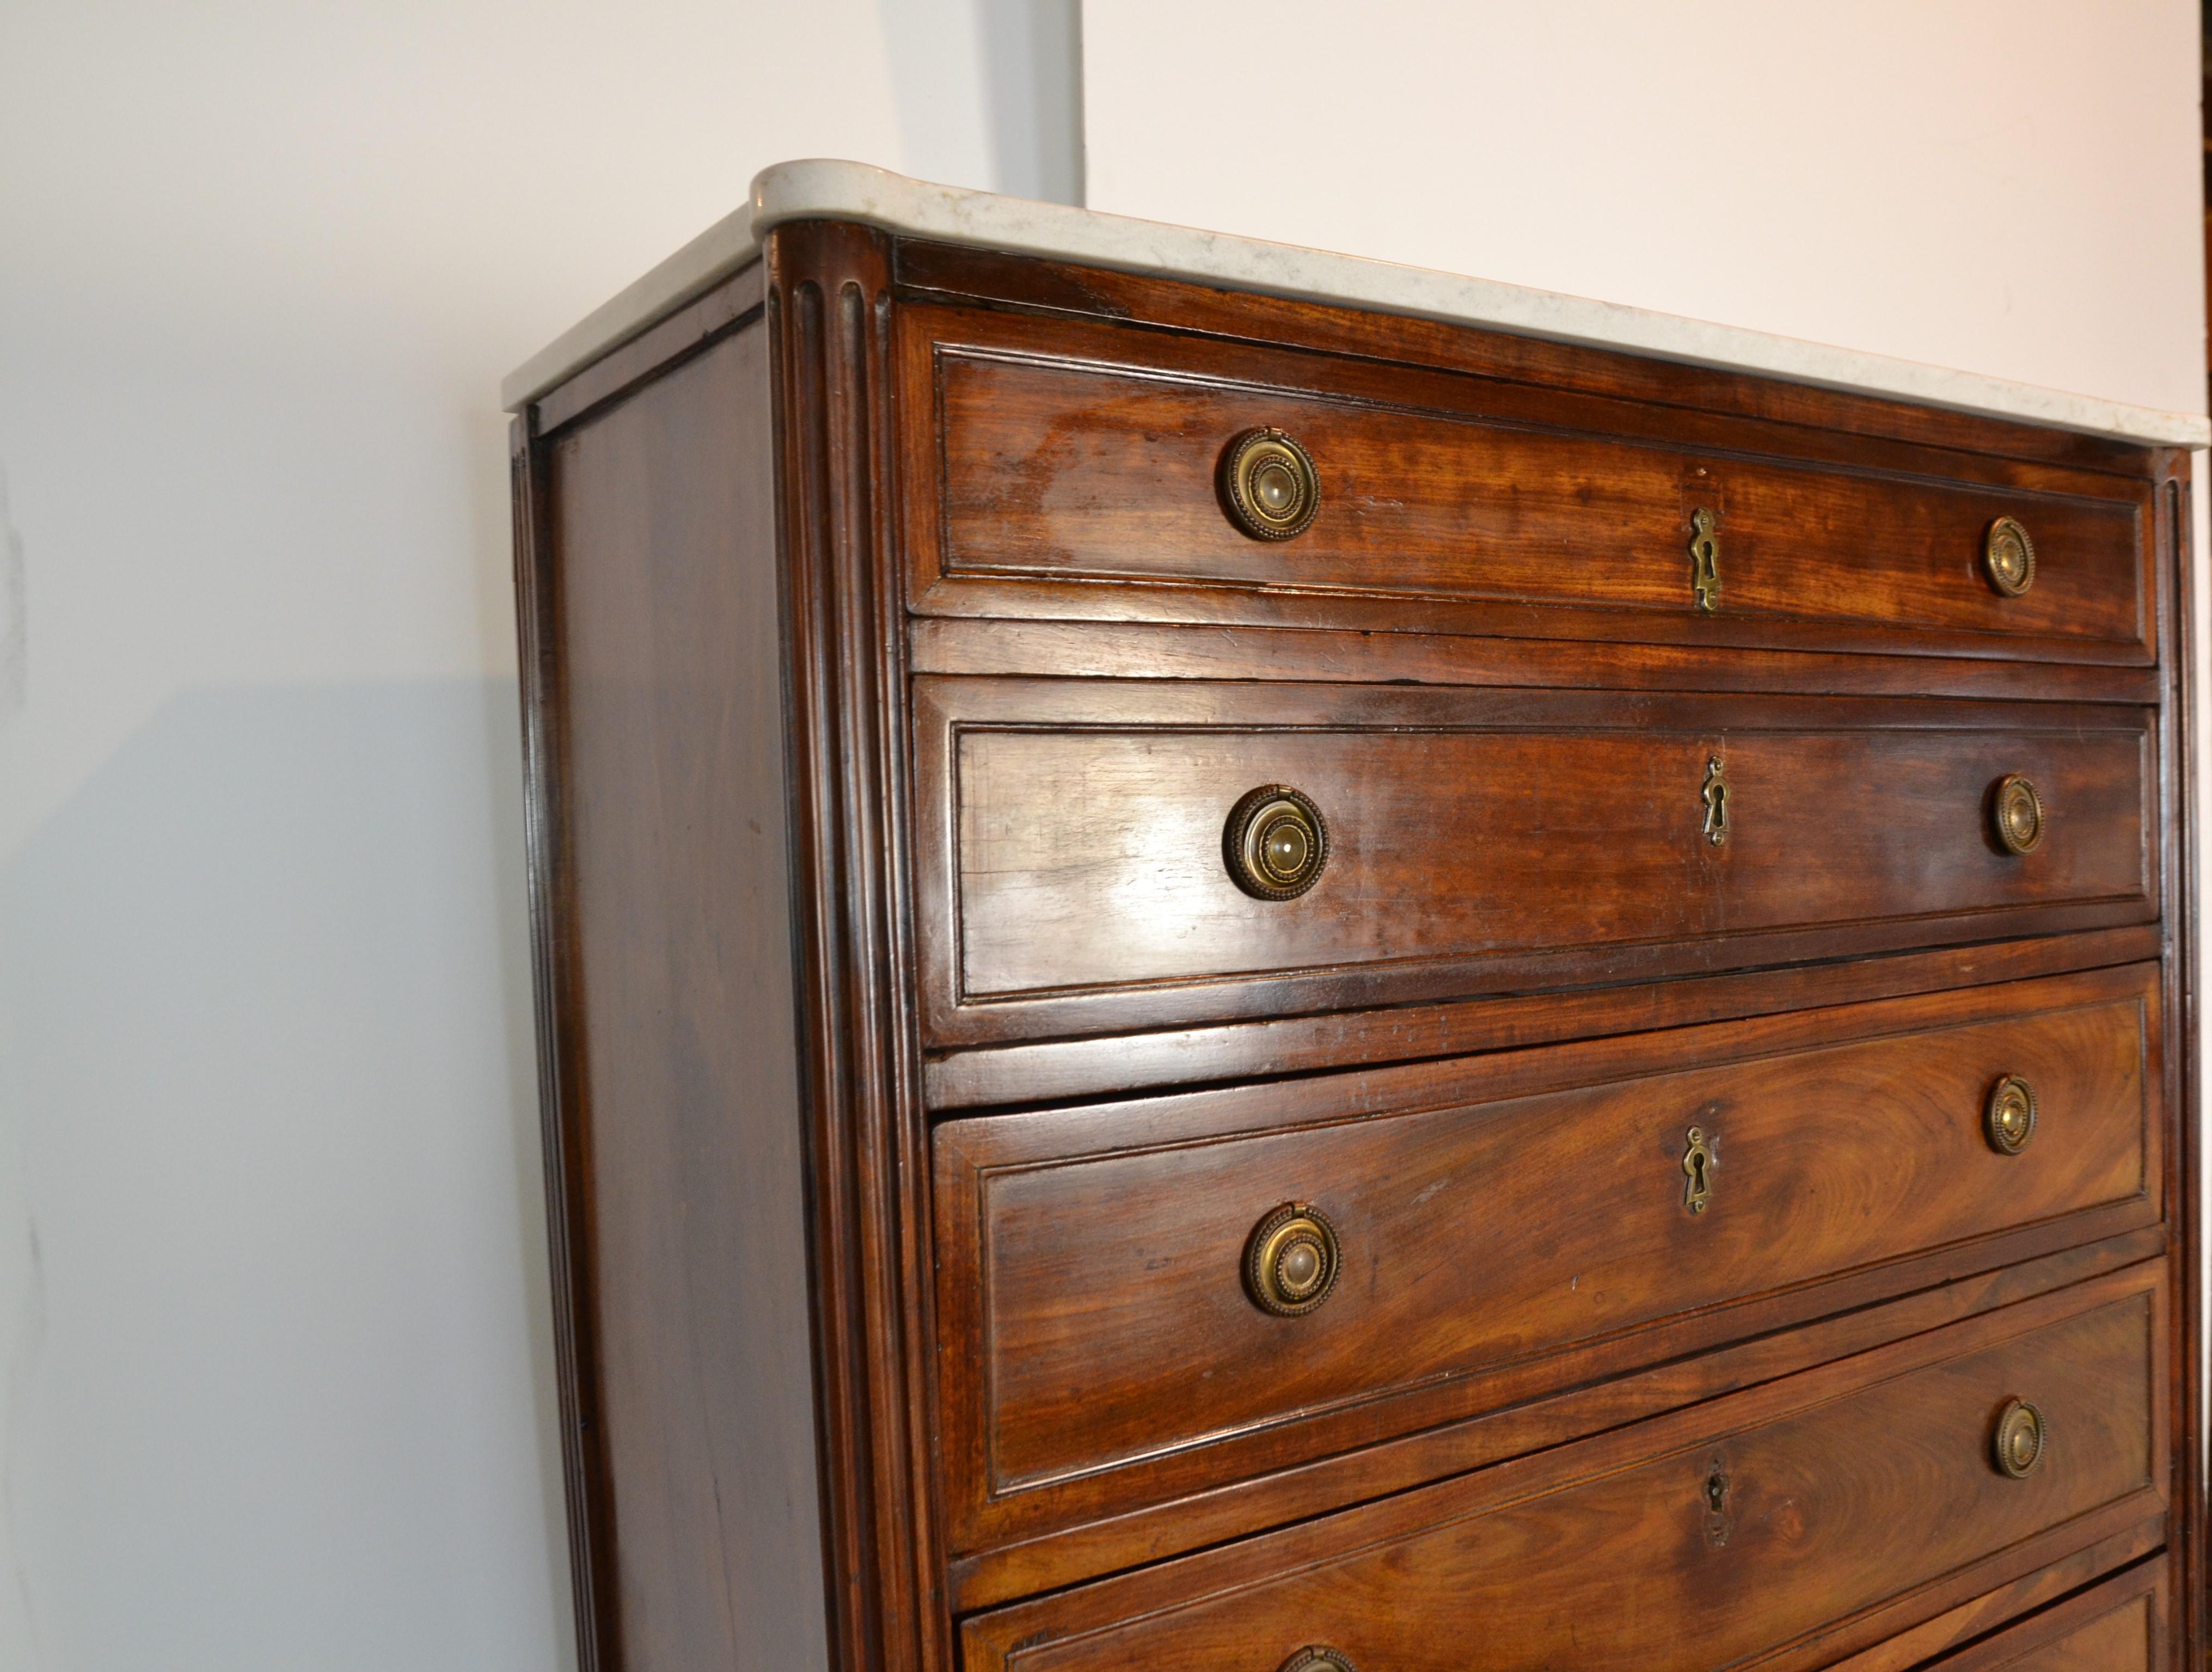 This is a Regency period chest of 8 full length drawers circa 1820. Old grain mahogany with oak and pine lined drawers. Replacement Spanish marble top, cut to original shape. Brass hardware and toe-caps.